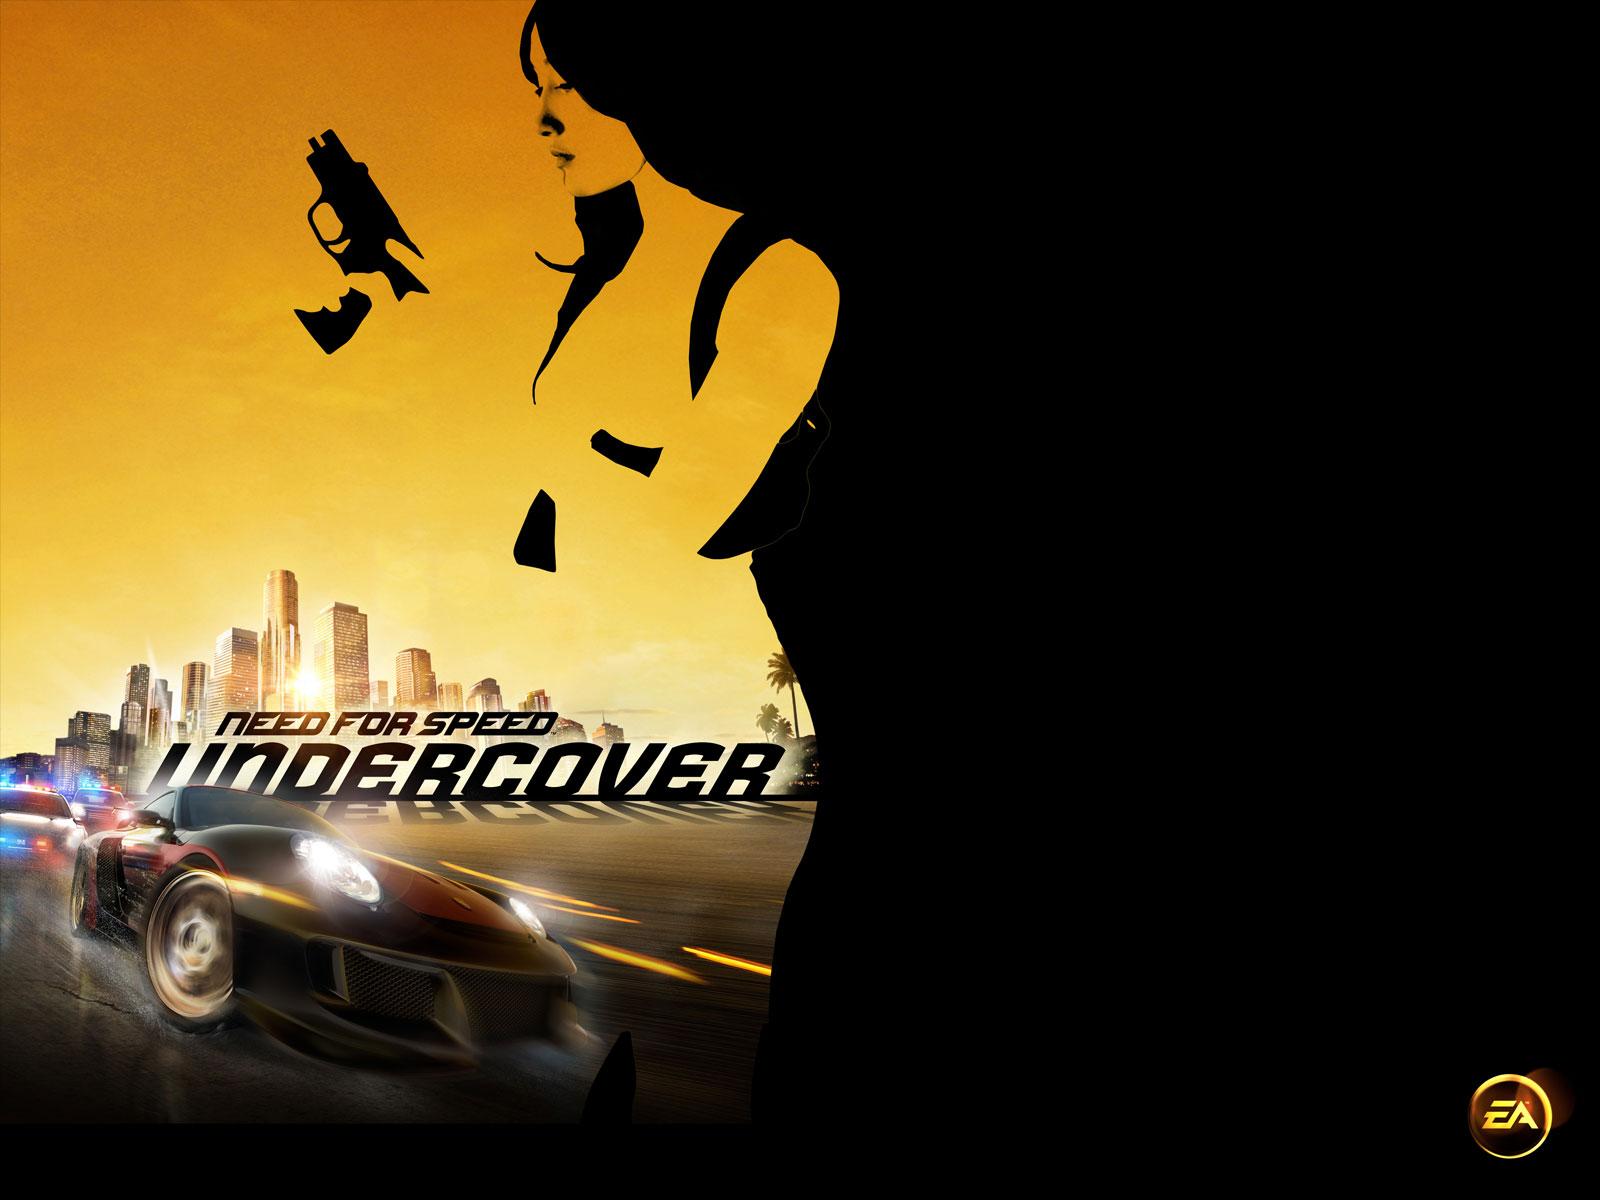 http://stopgame.ru/files/wallpapers/9604/need_for_speed_undercover-5.jpg